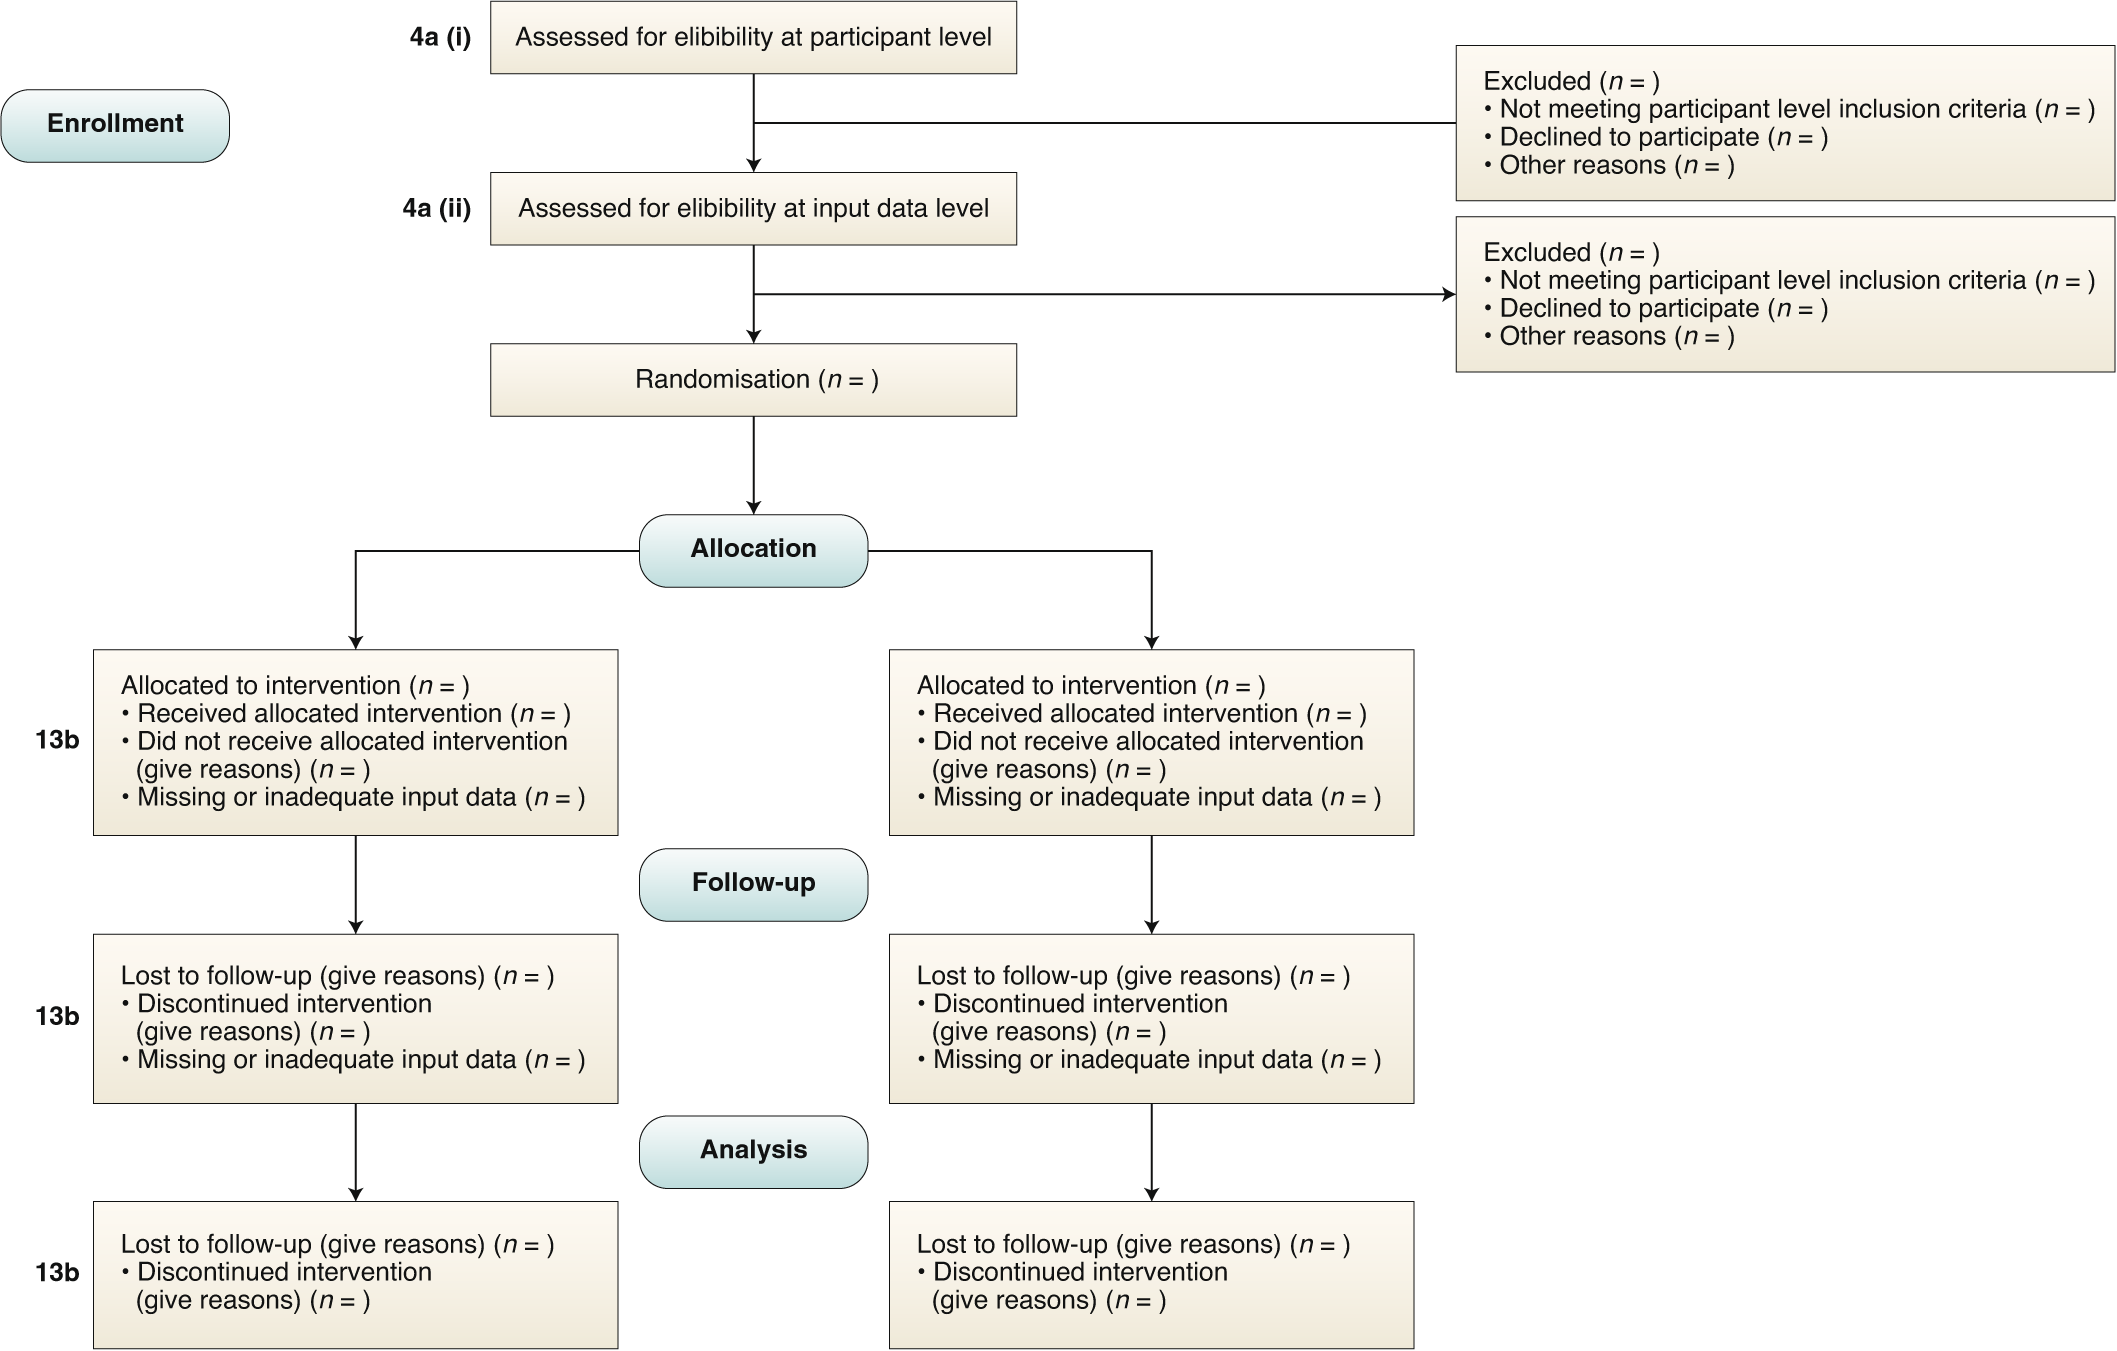 Reporting guidelines for clinical trial reports for interventions involving  artificial intelligence: the CONSORT-AI extension | Nature Medicine